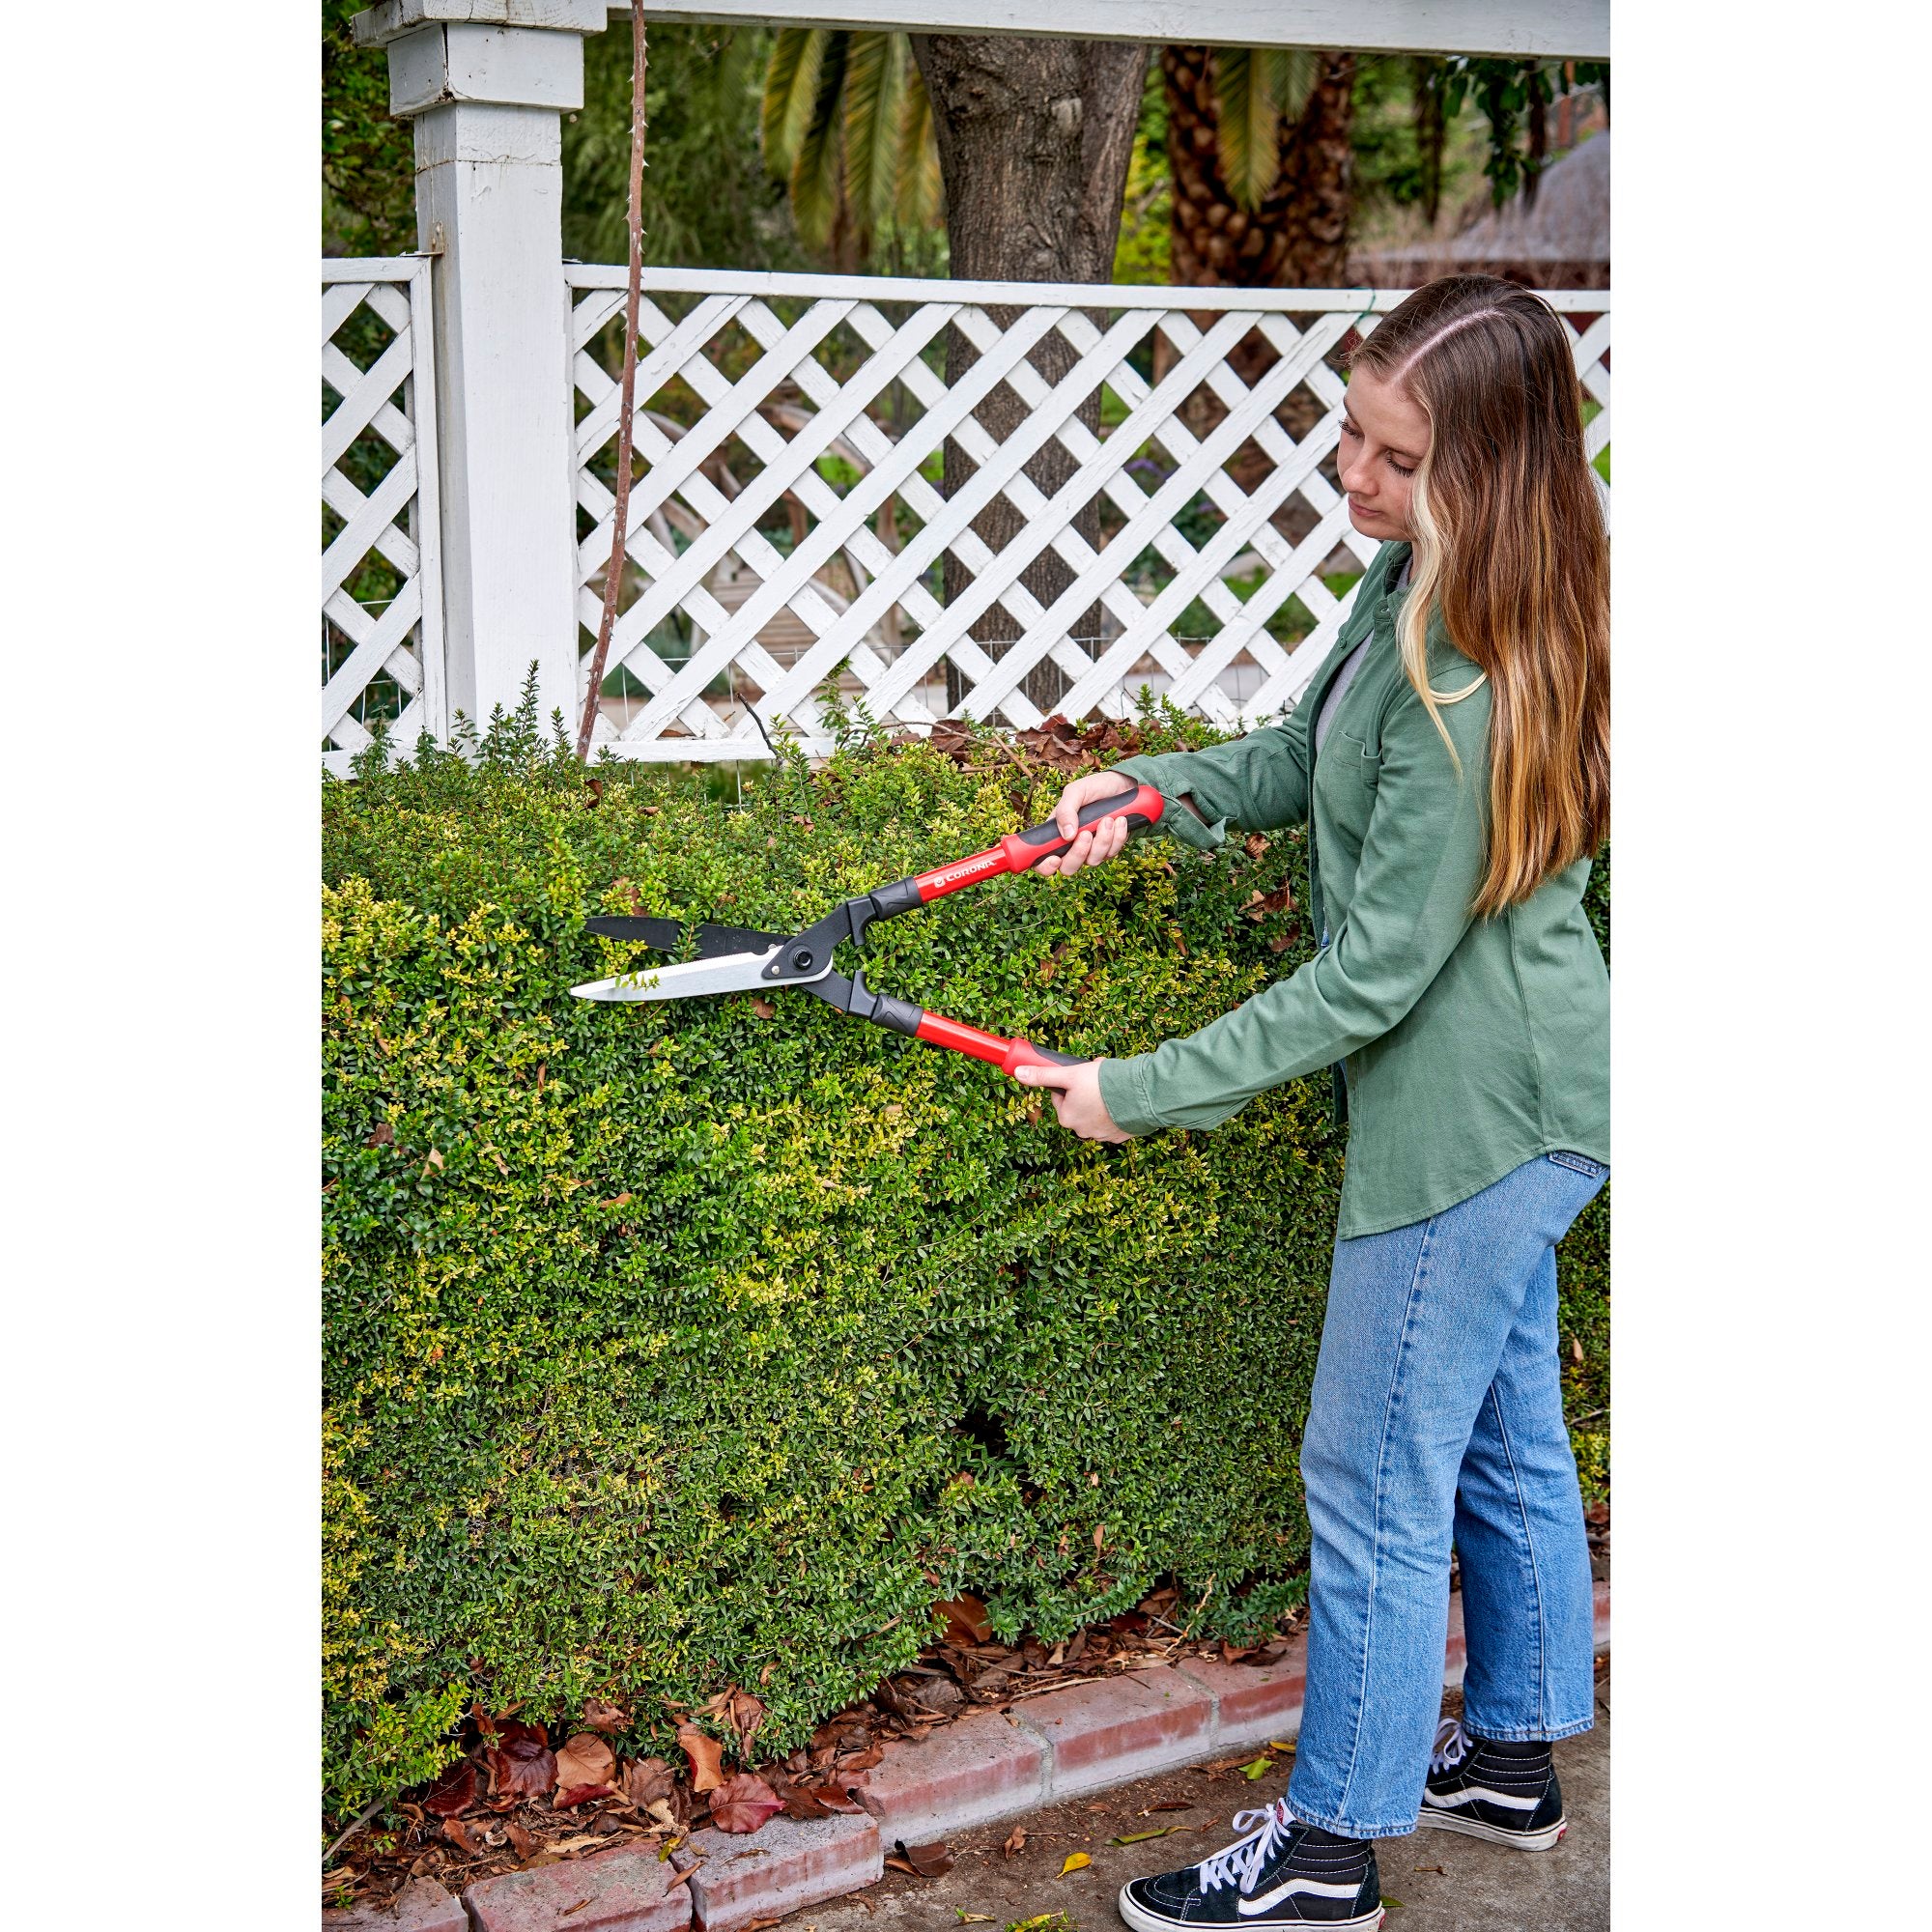 Compound Action Hedge Shears, 9 in. Blades